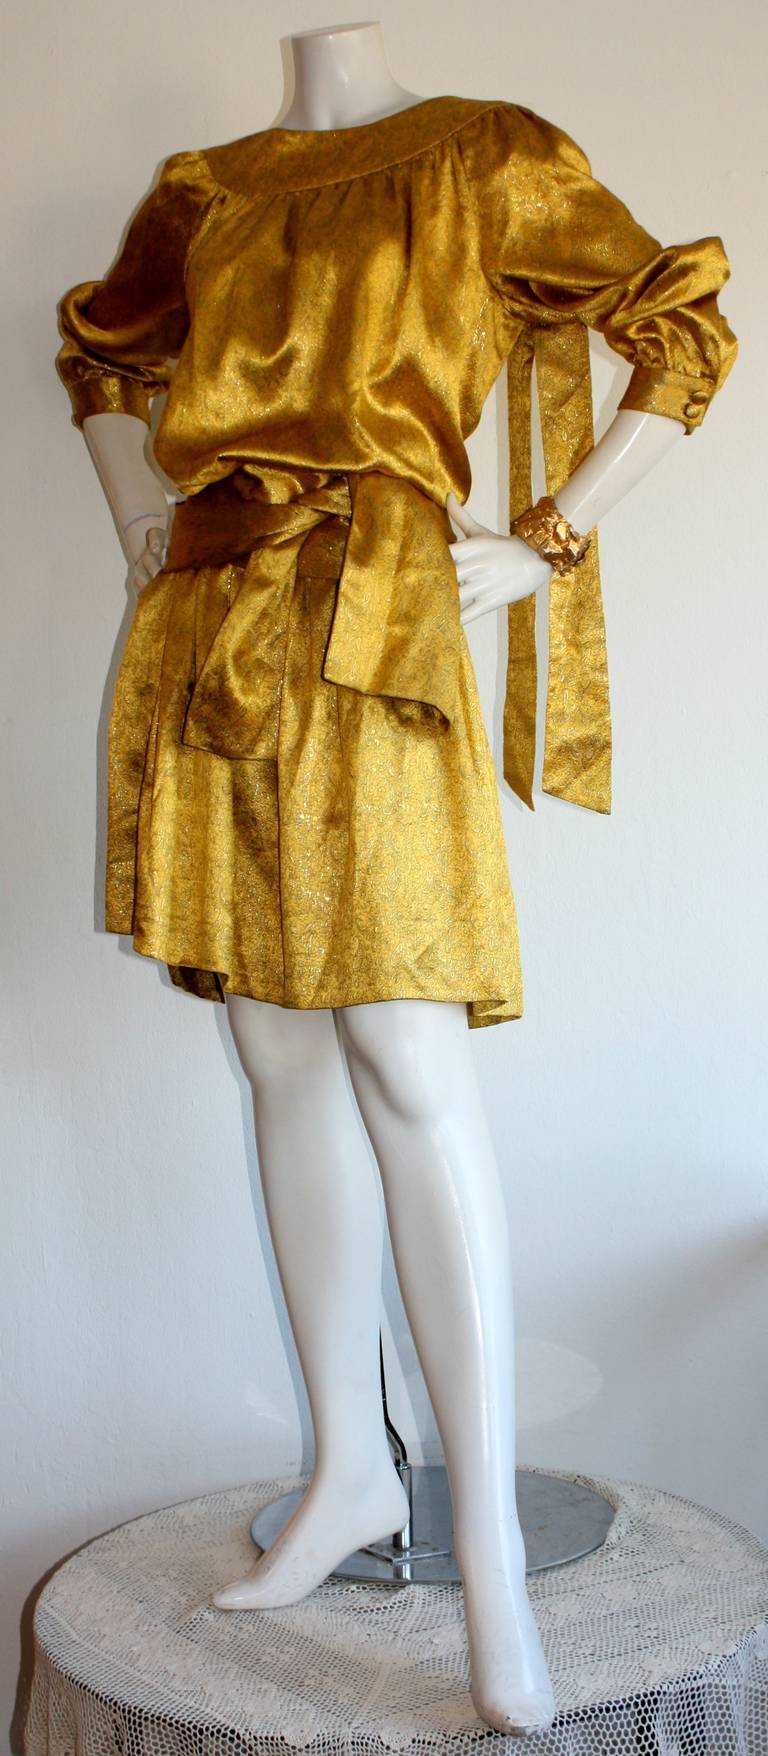 Stunning vintage Brioni dress and sash (can be worn as belt, or headscarf). Pretty oriental themed print woven in gold silk thread throughout. Fabulous drop waist that can be worn so many different ways! Shoulder features matching ribbon that can be